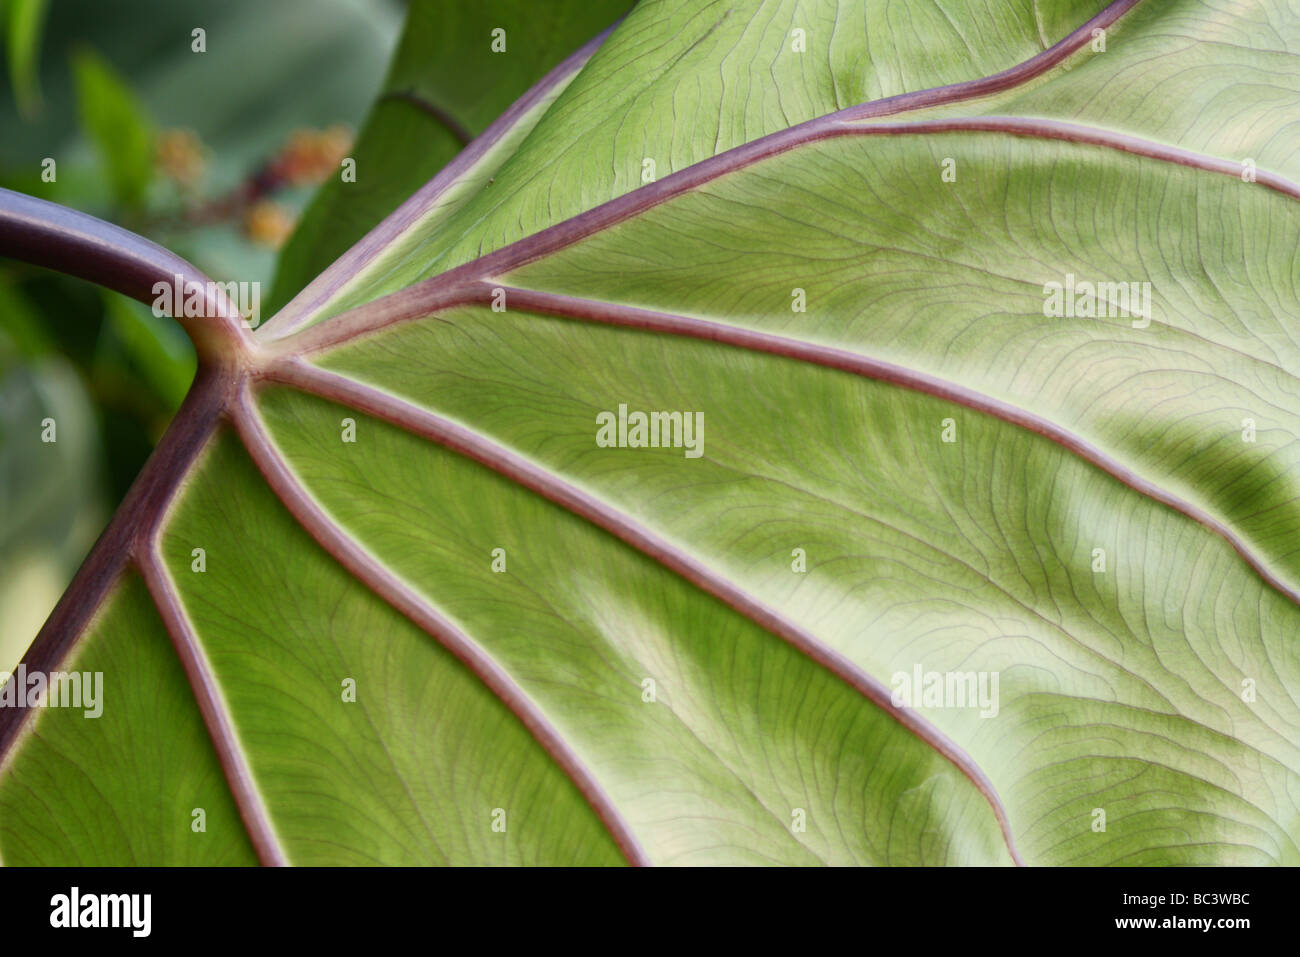 Close-up of giant leaf with stem plump veins. Stock Photo